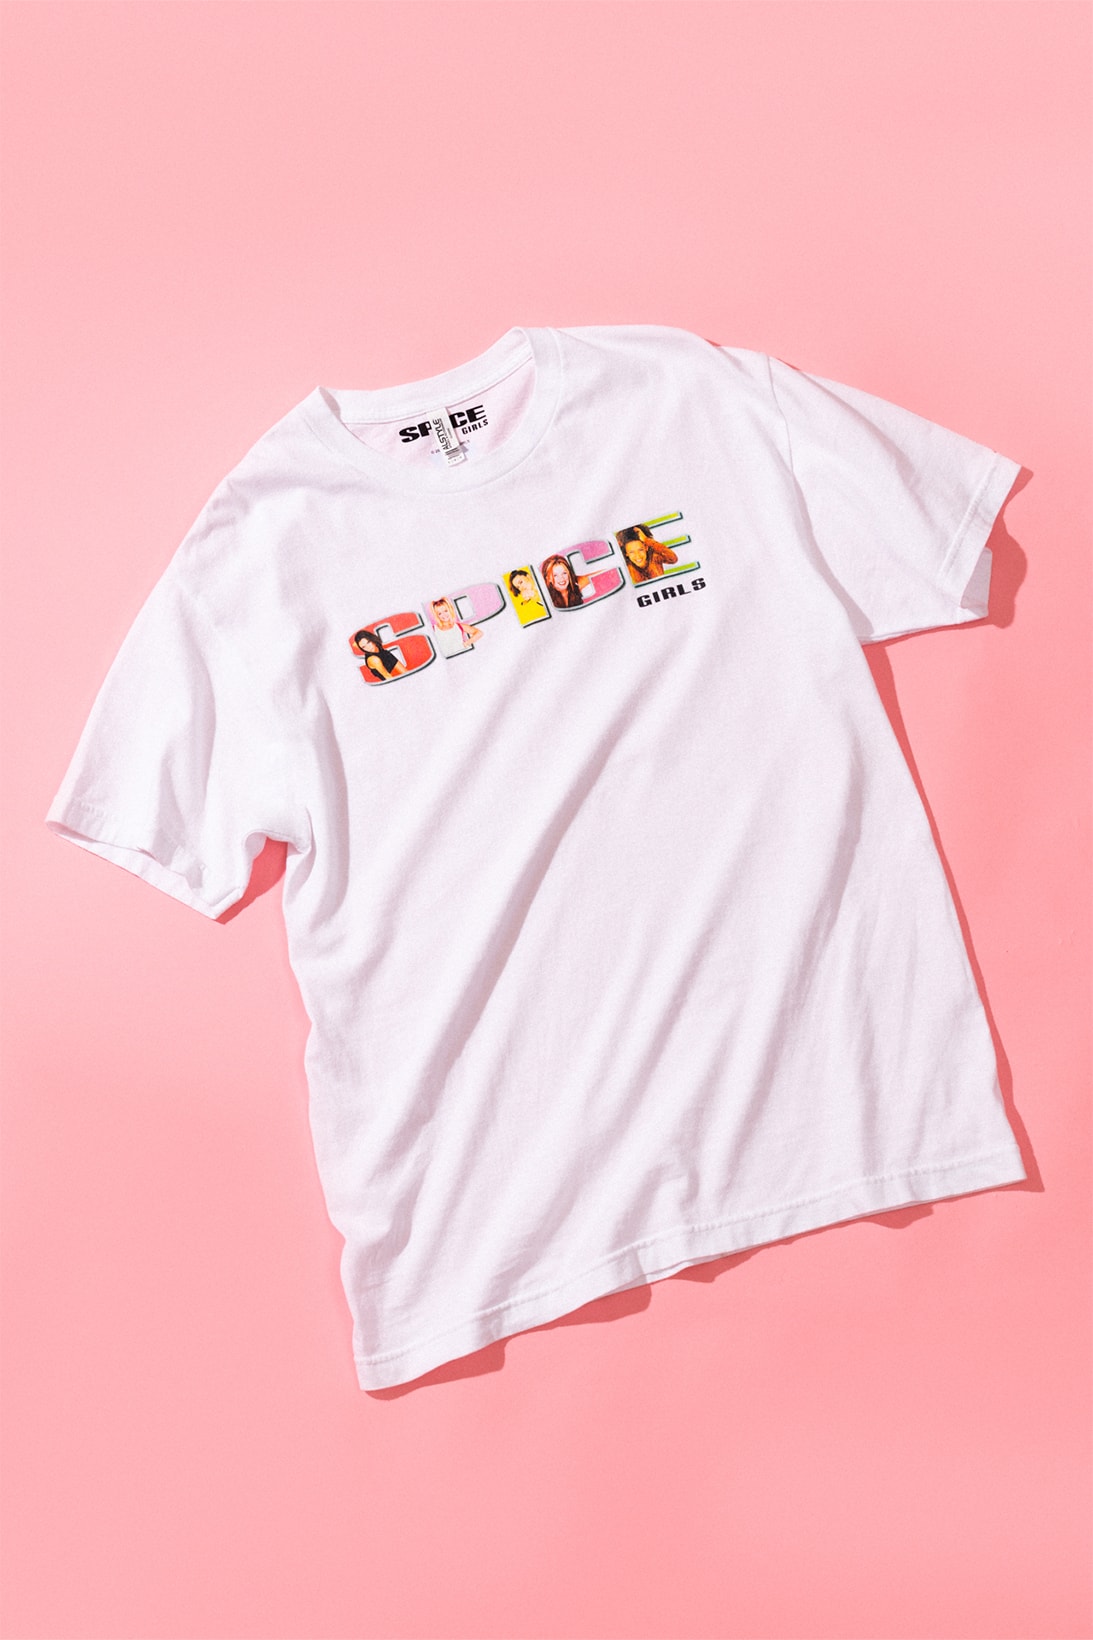 Spice Girls weber Collection HBX T-shirts White Color Branding